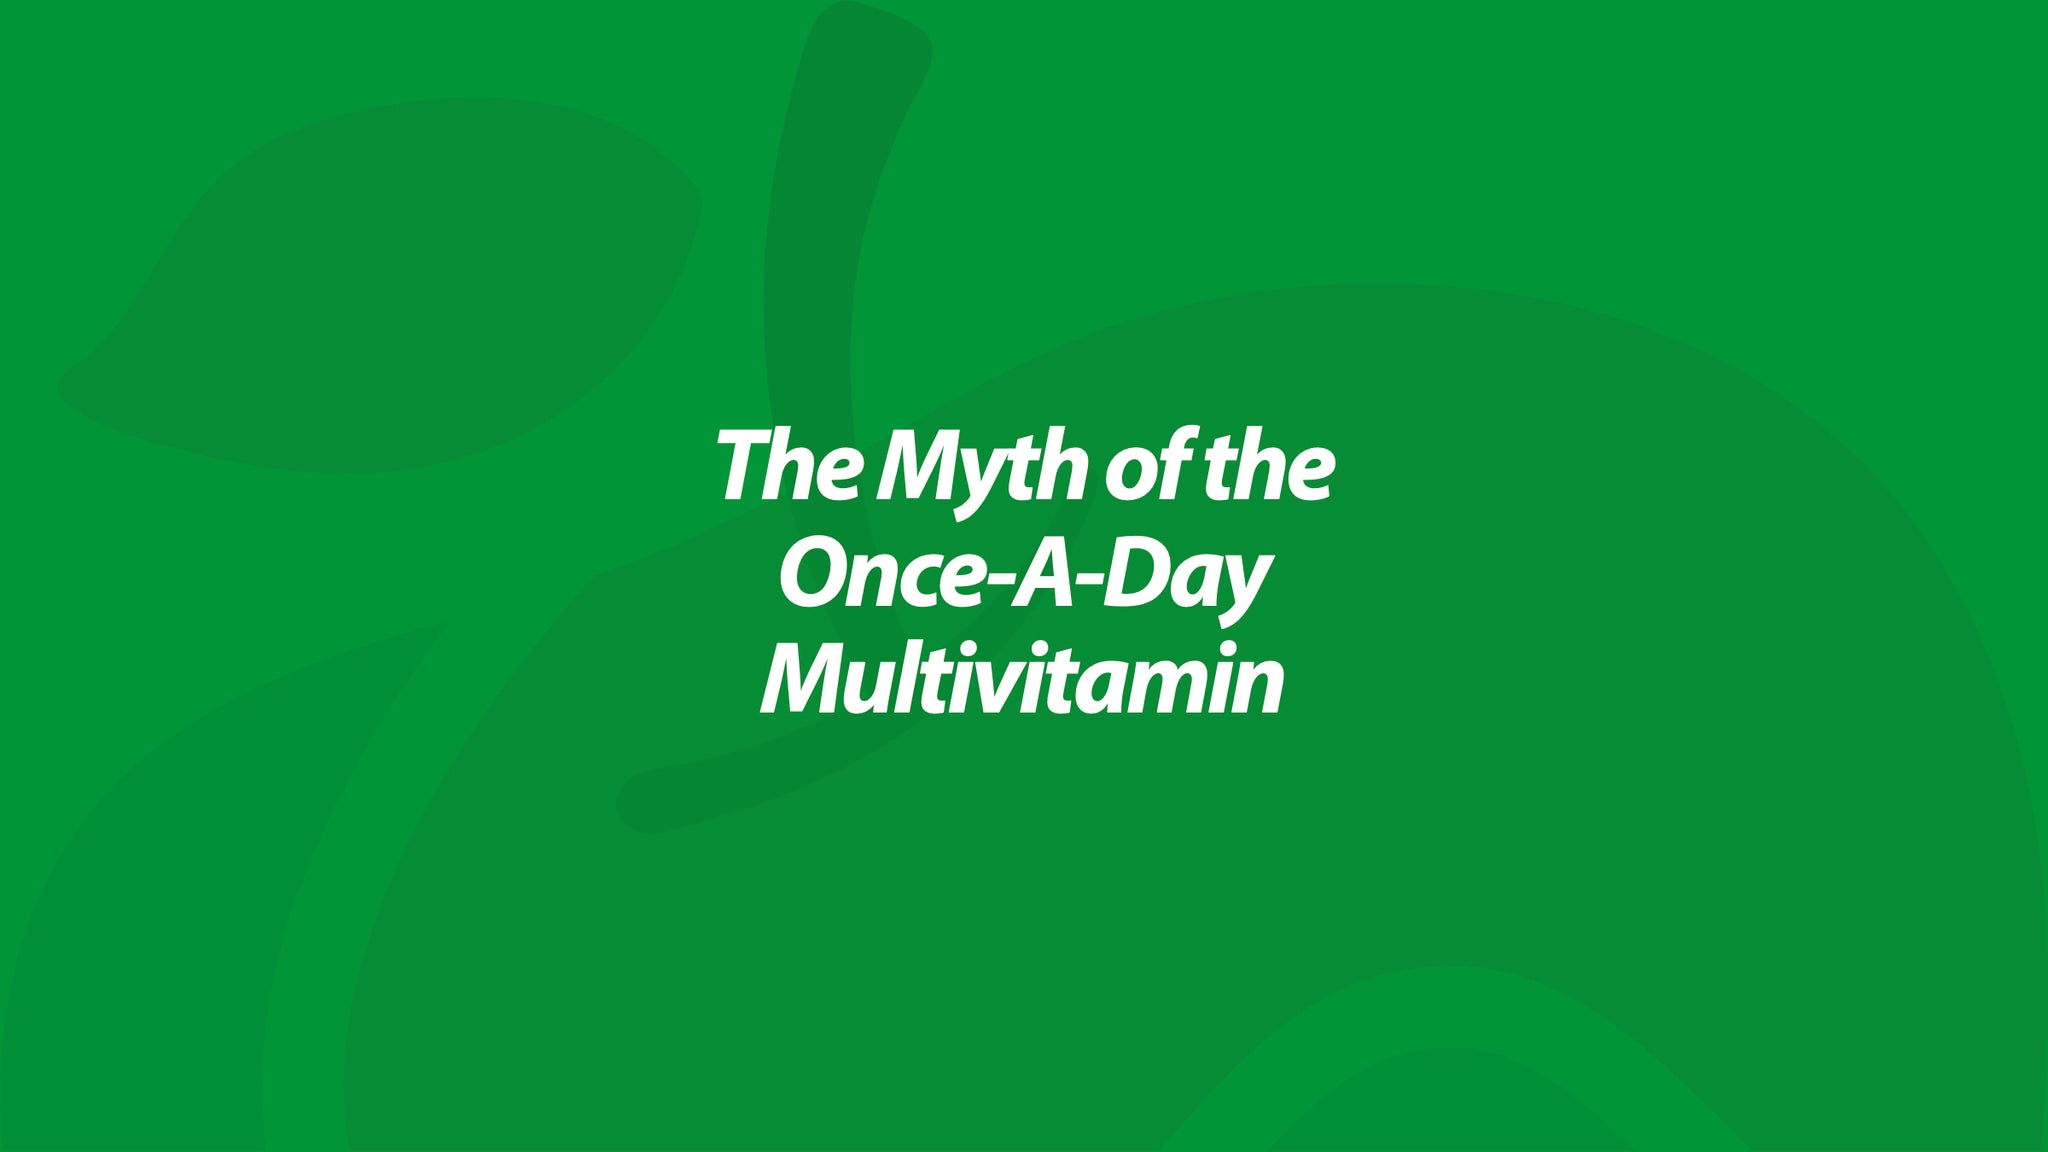 The Myth of the Once-A-Day Multivitamin